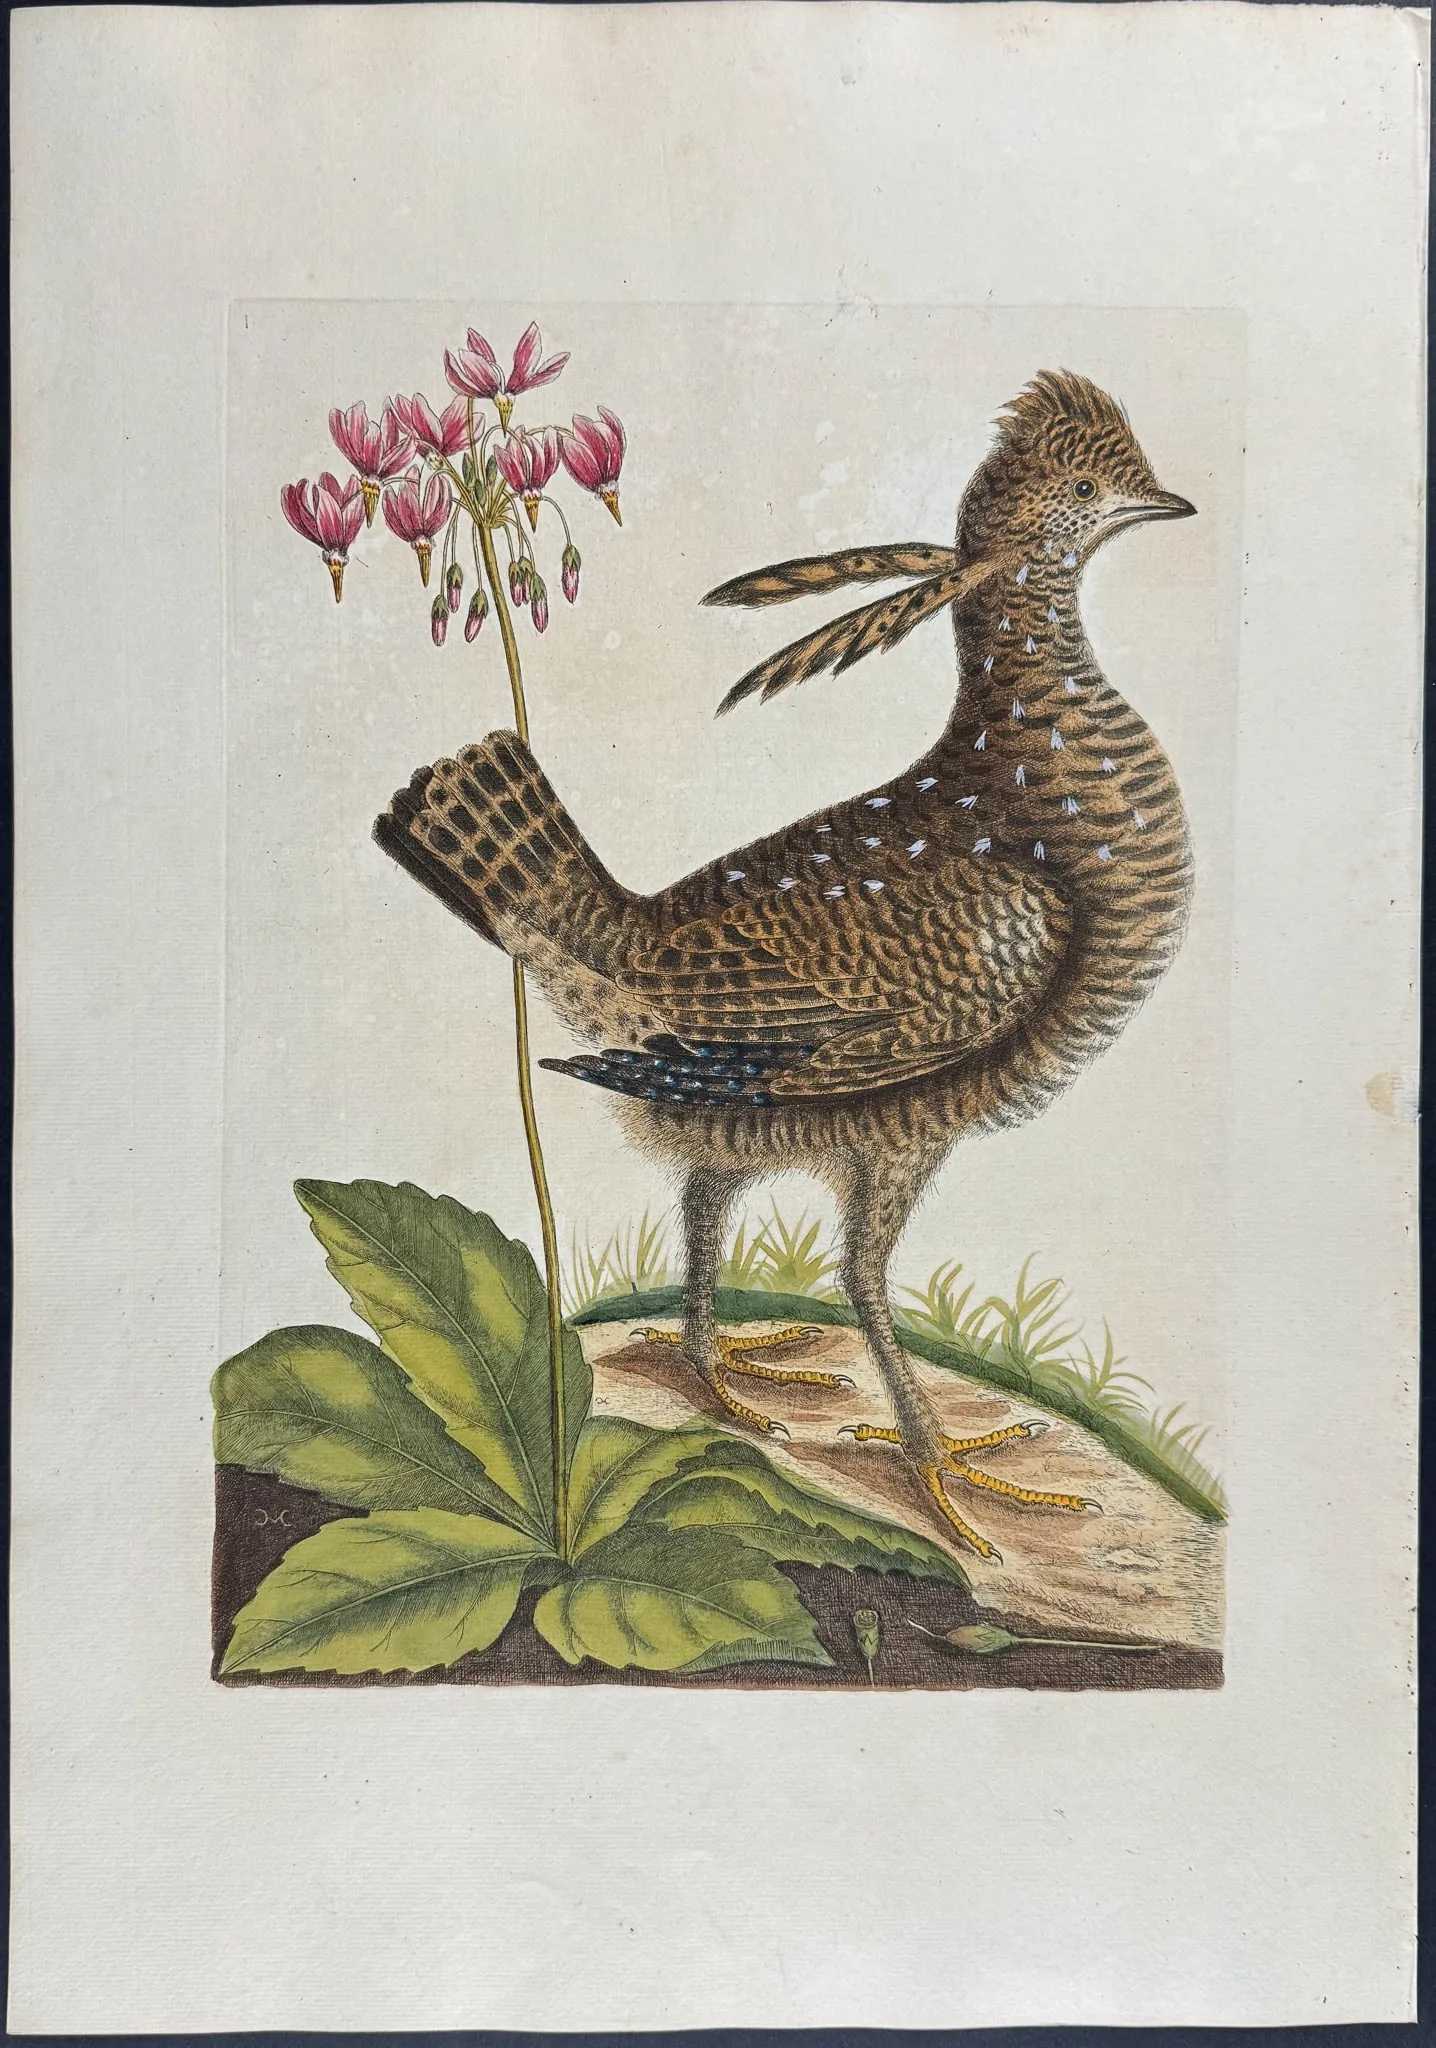 Mark Catesby’s Heath Hen and Eastern Shooting Star hand-colored engraving, which sold for $5,555 with buyer’s premium at Trillium on April 6.